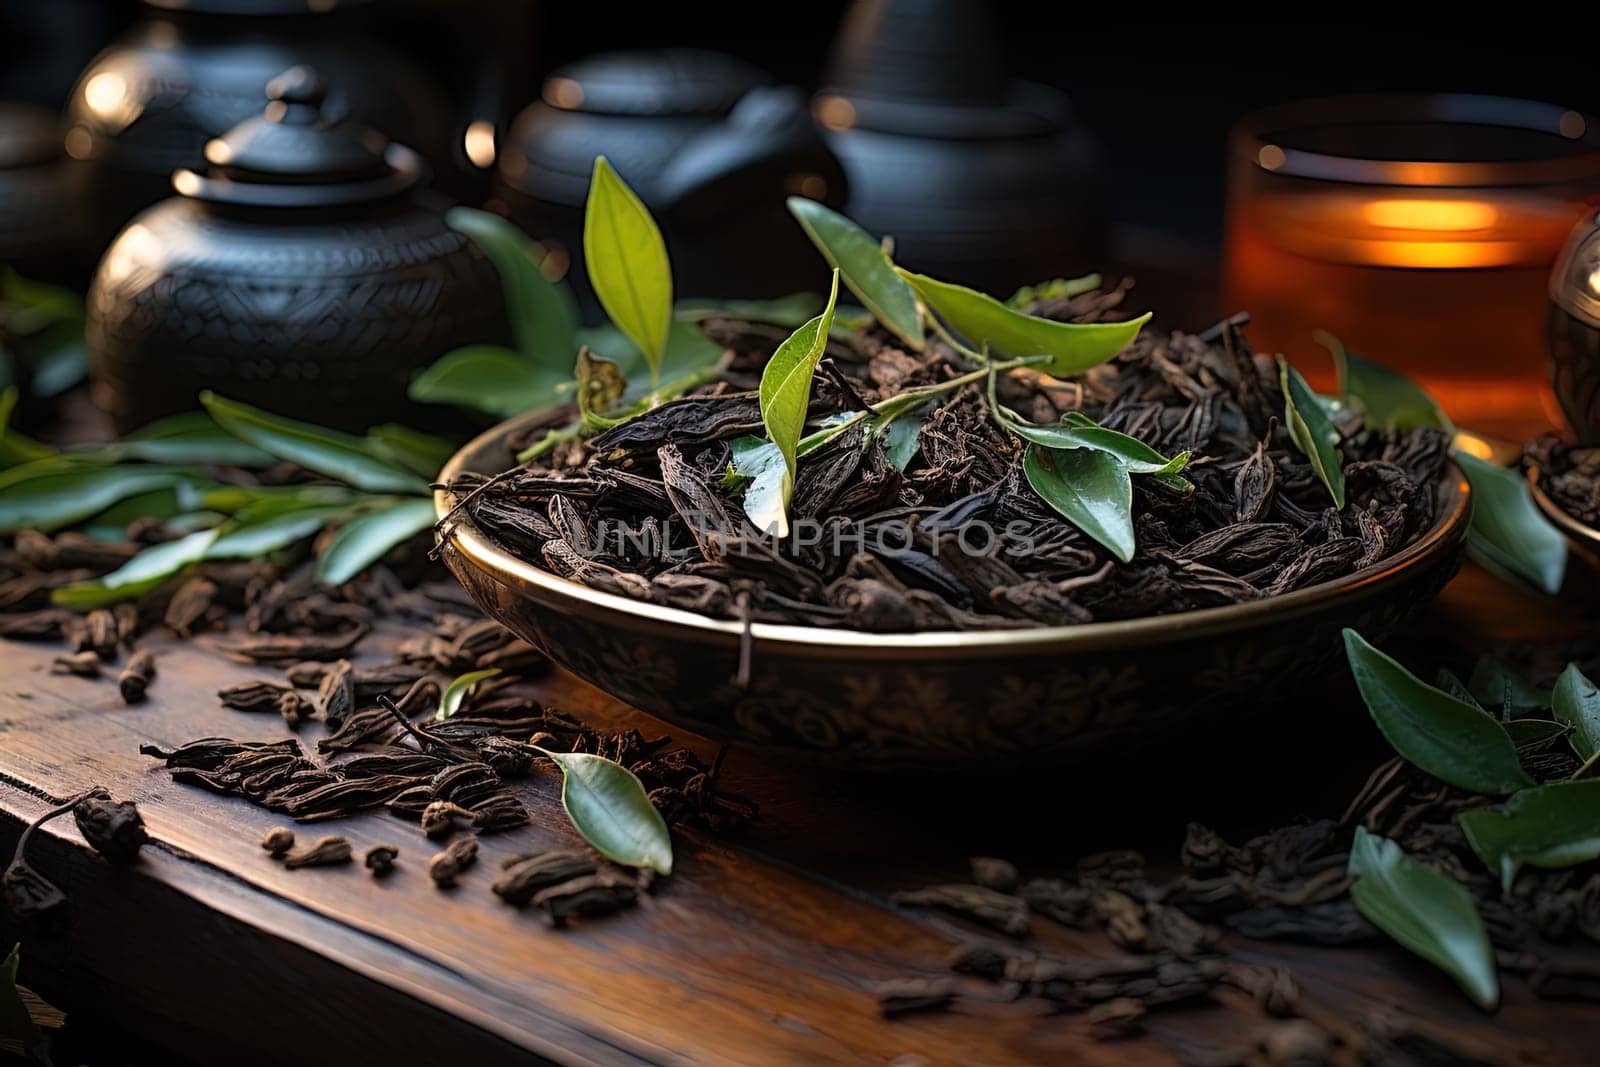 Dried tea leaves on background of decorated decorated wooden table illustration